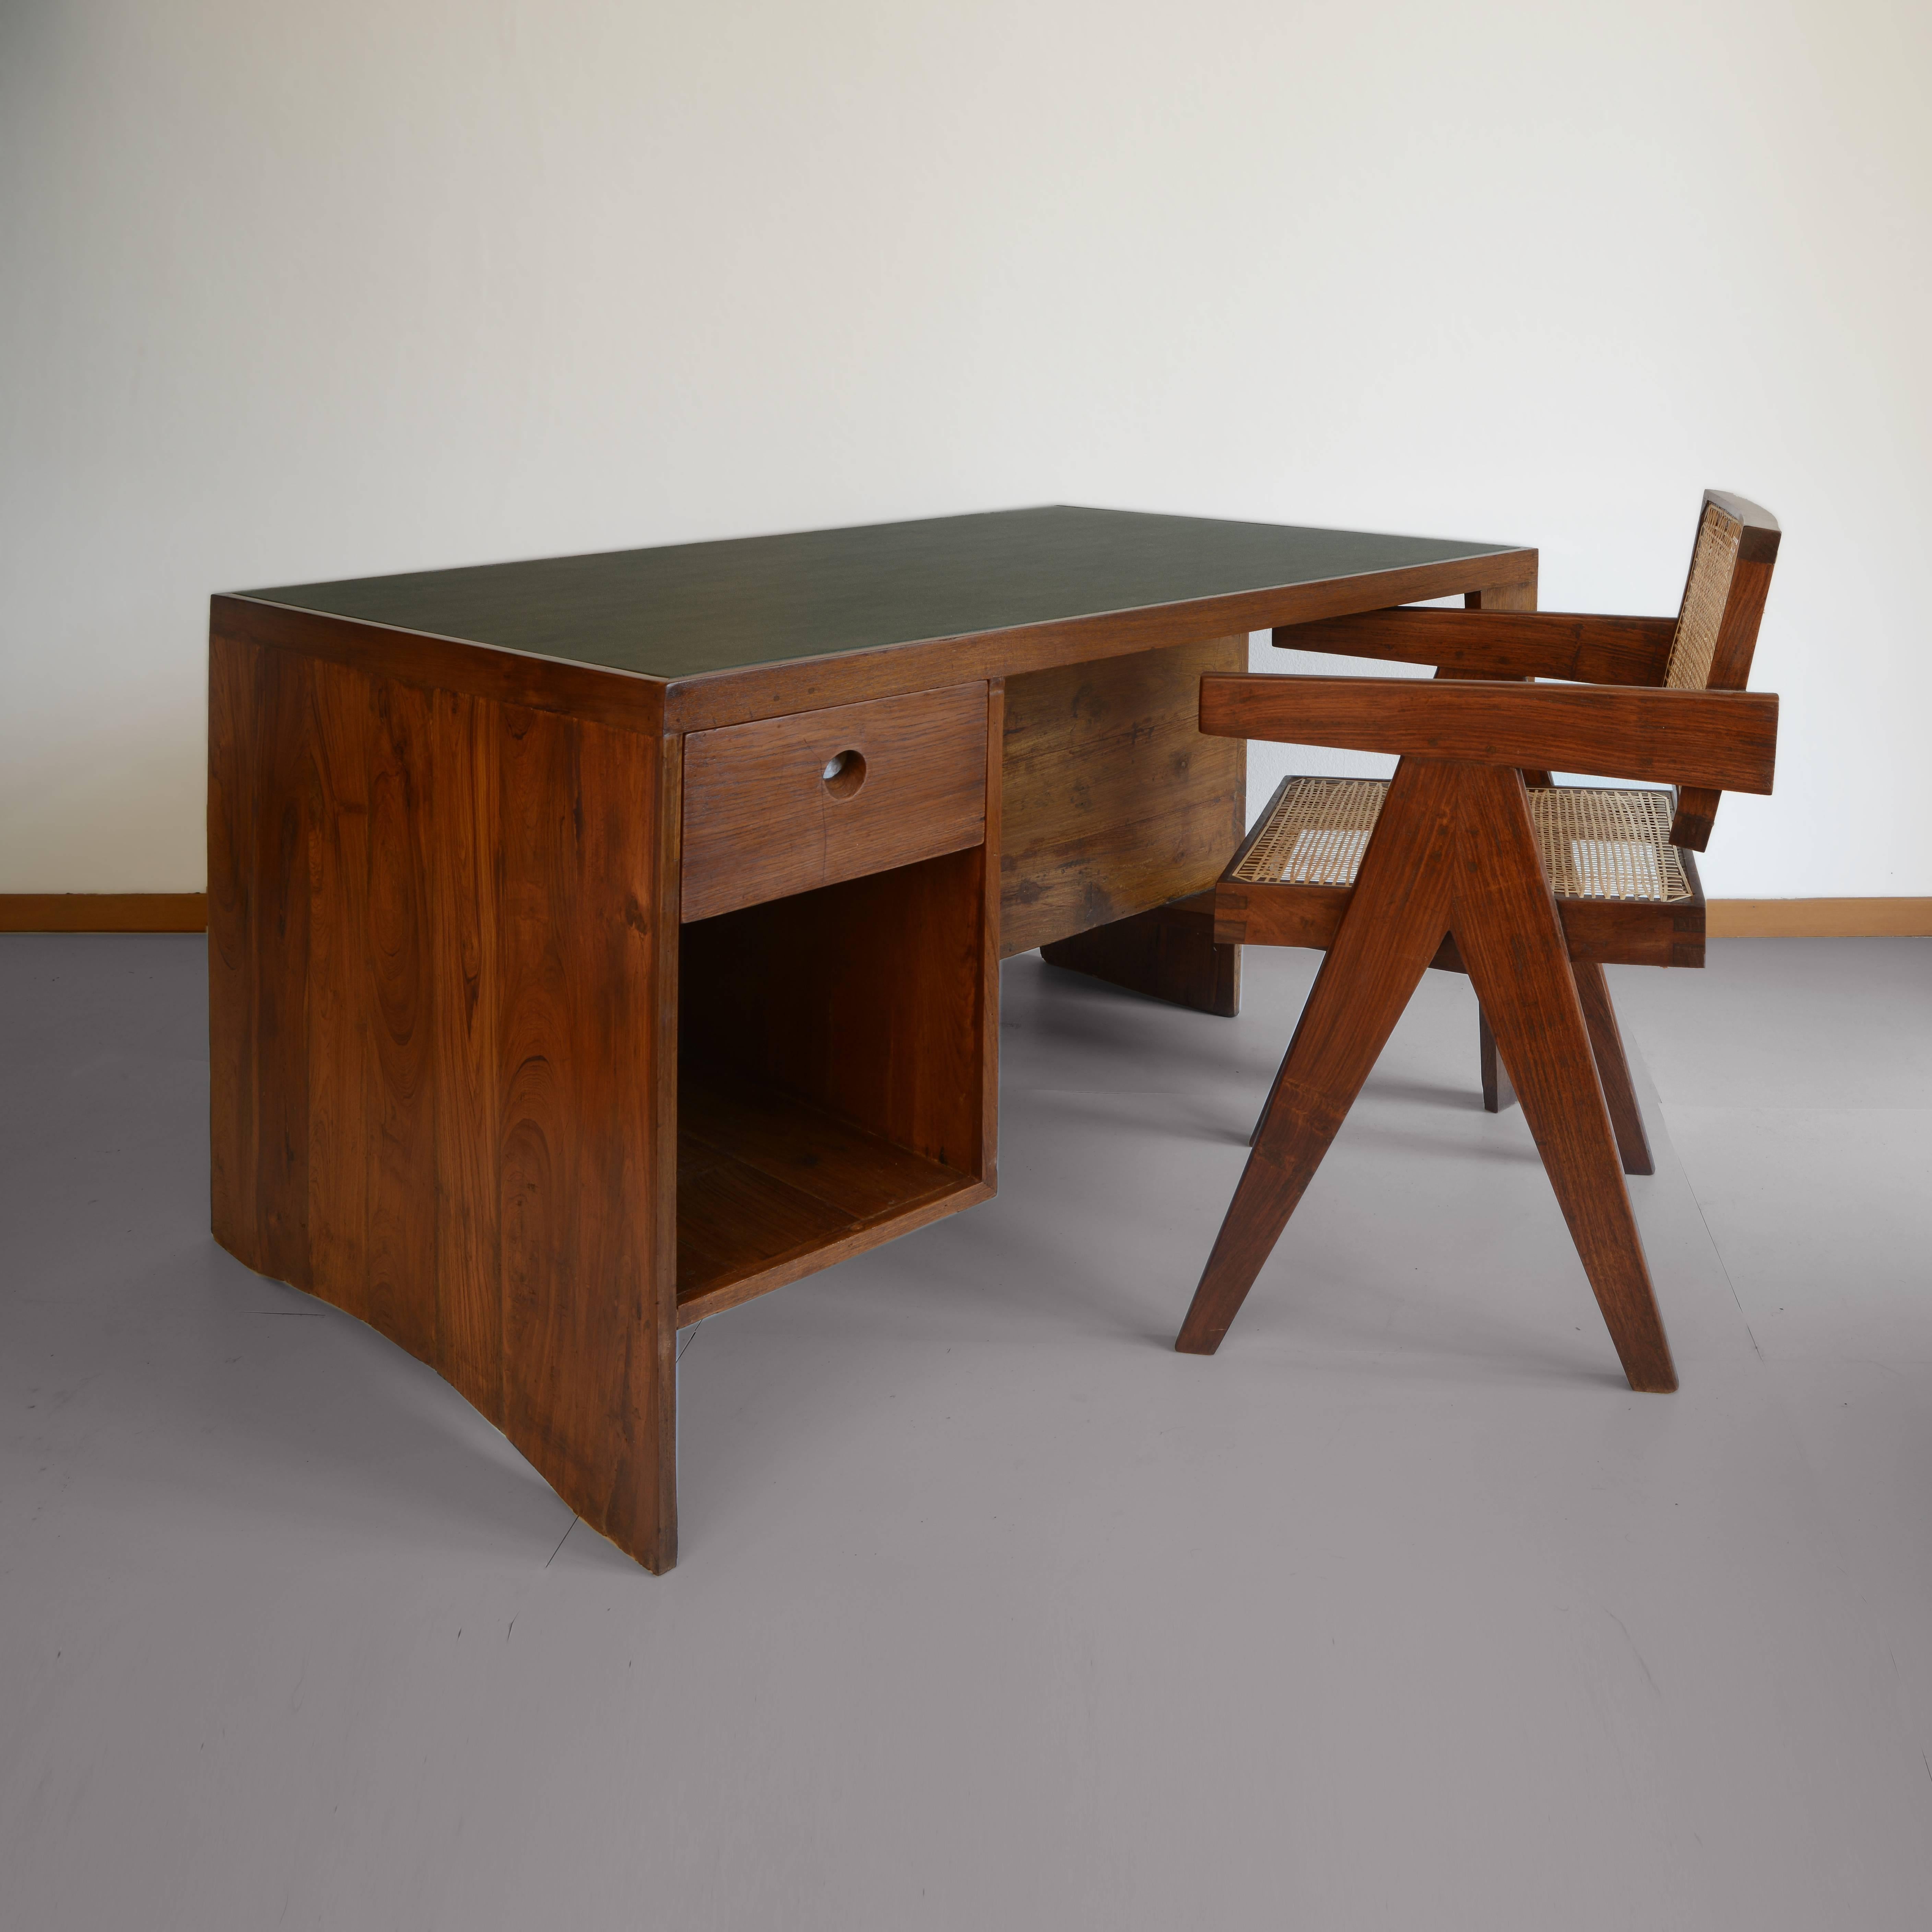 Indian Pierre Jeanneret Office Desk with Visible for Chandigarh